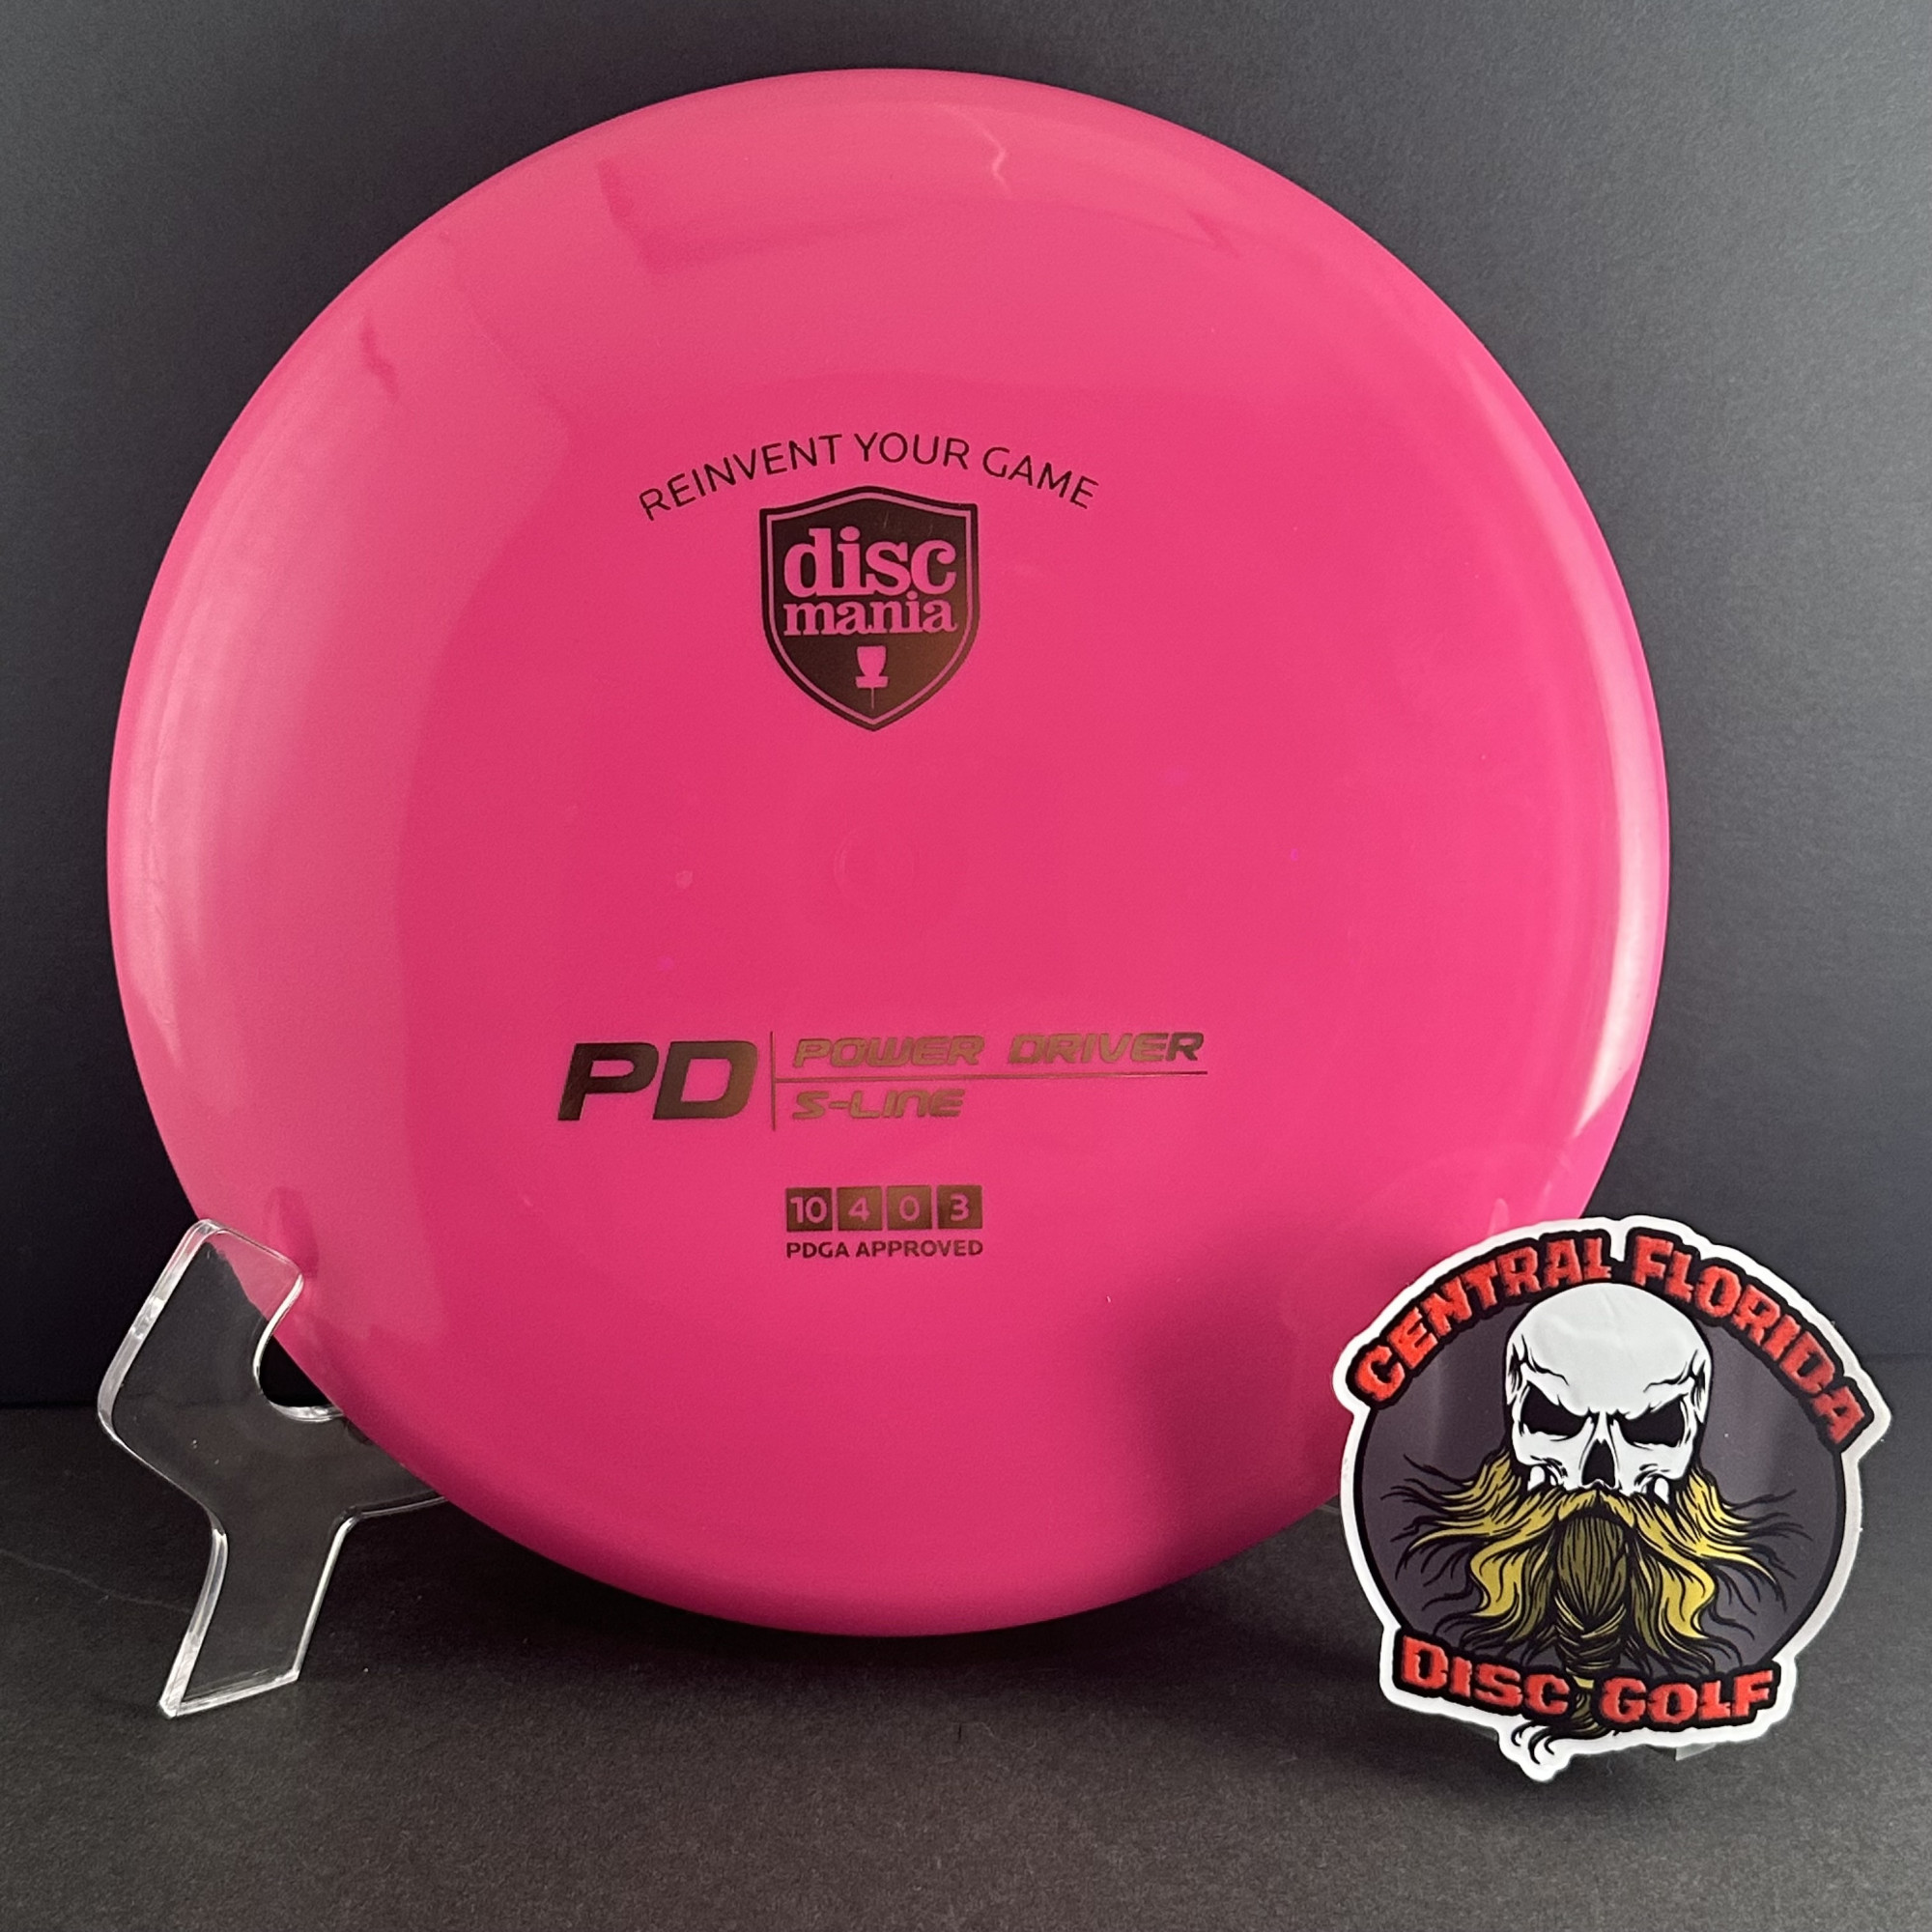 products DISCMANIA - SLINE PD - 174G - PINK/GOLD